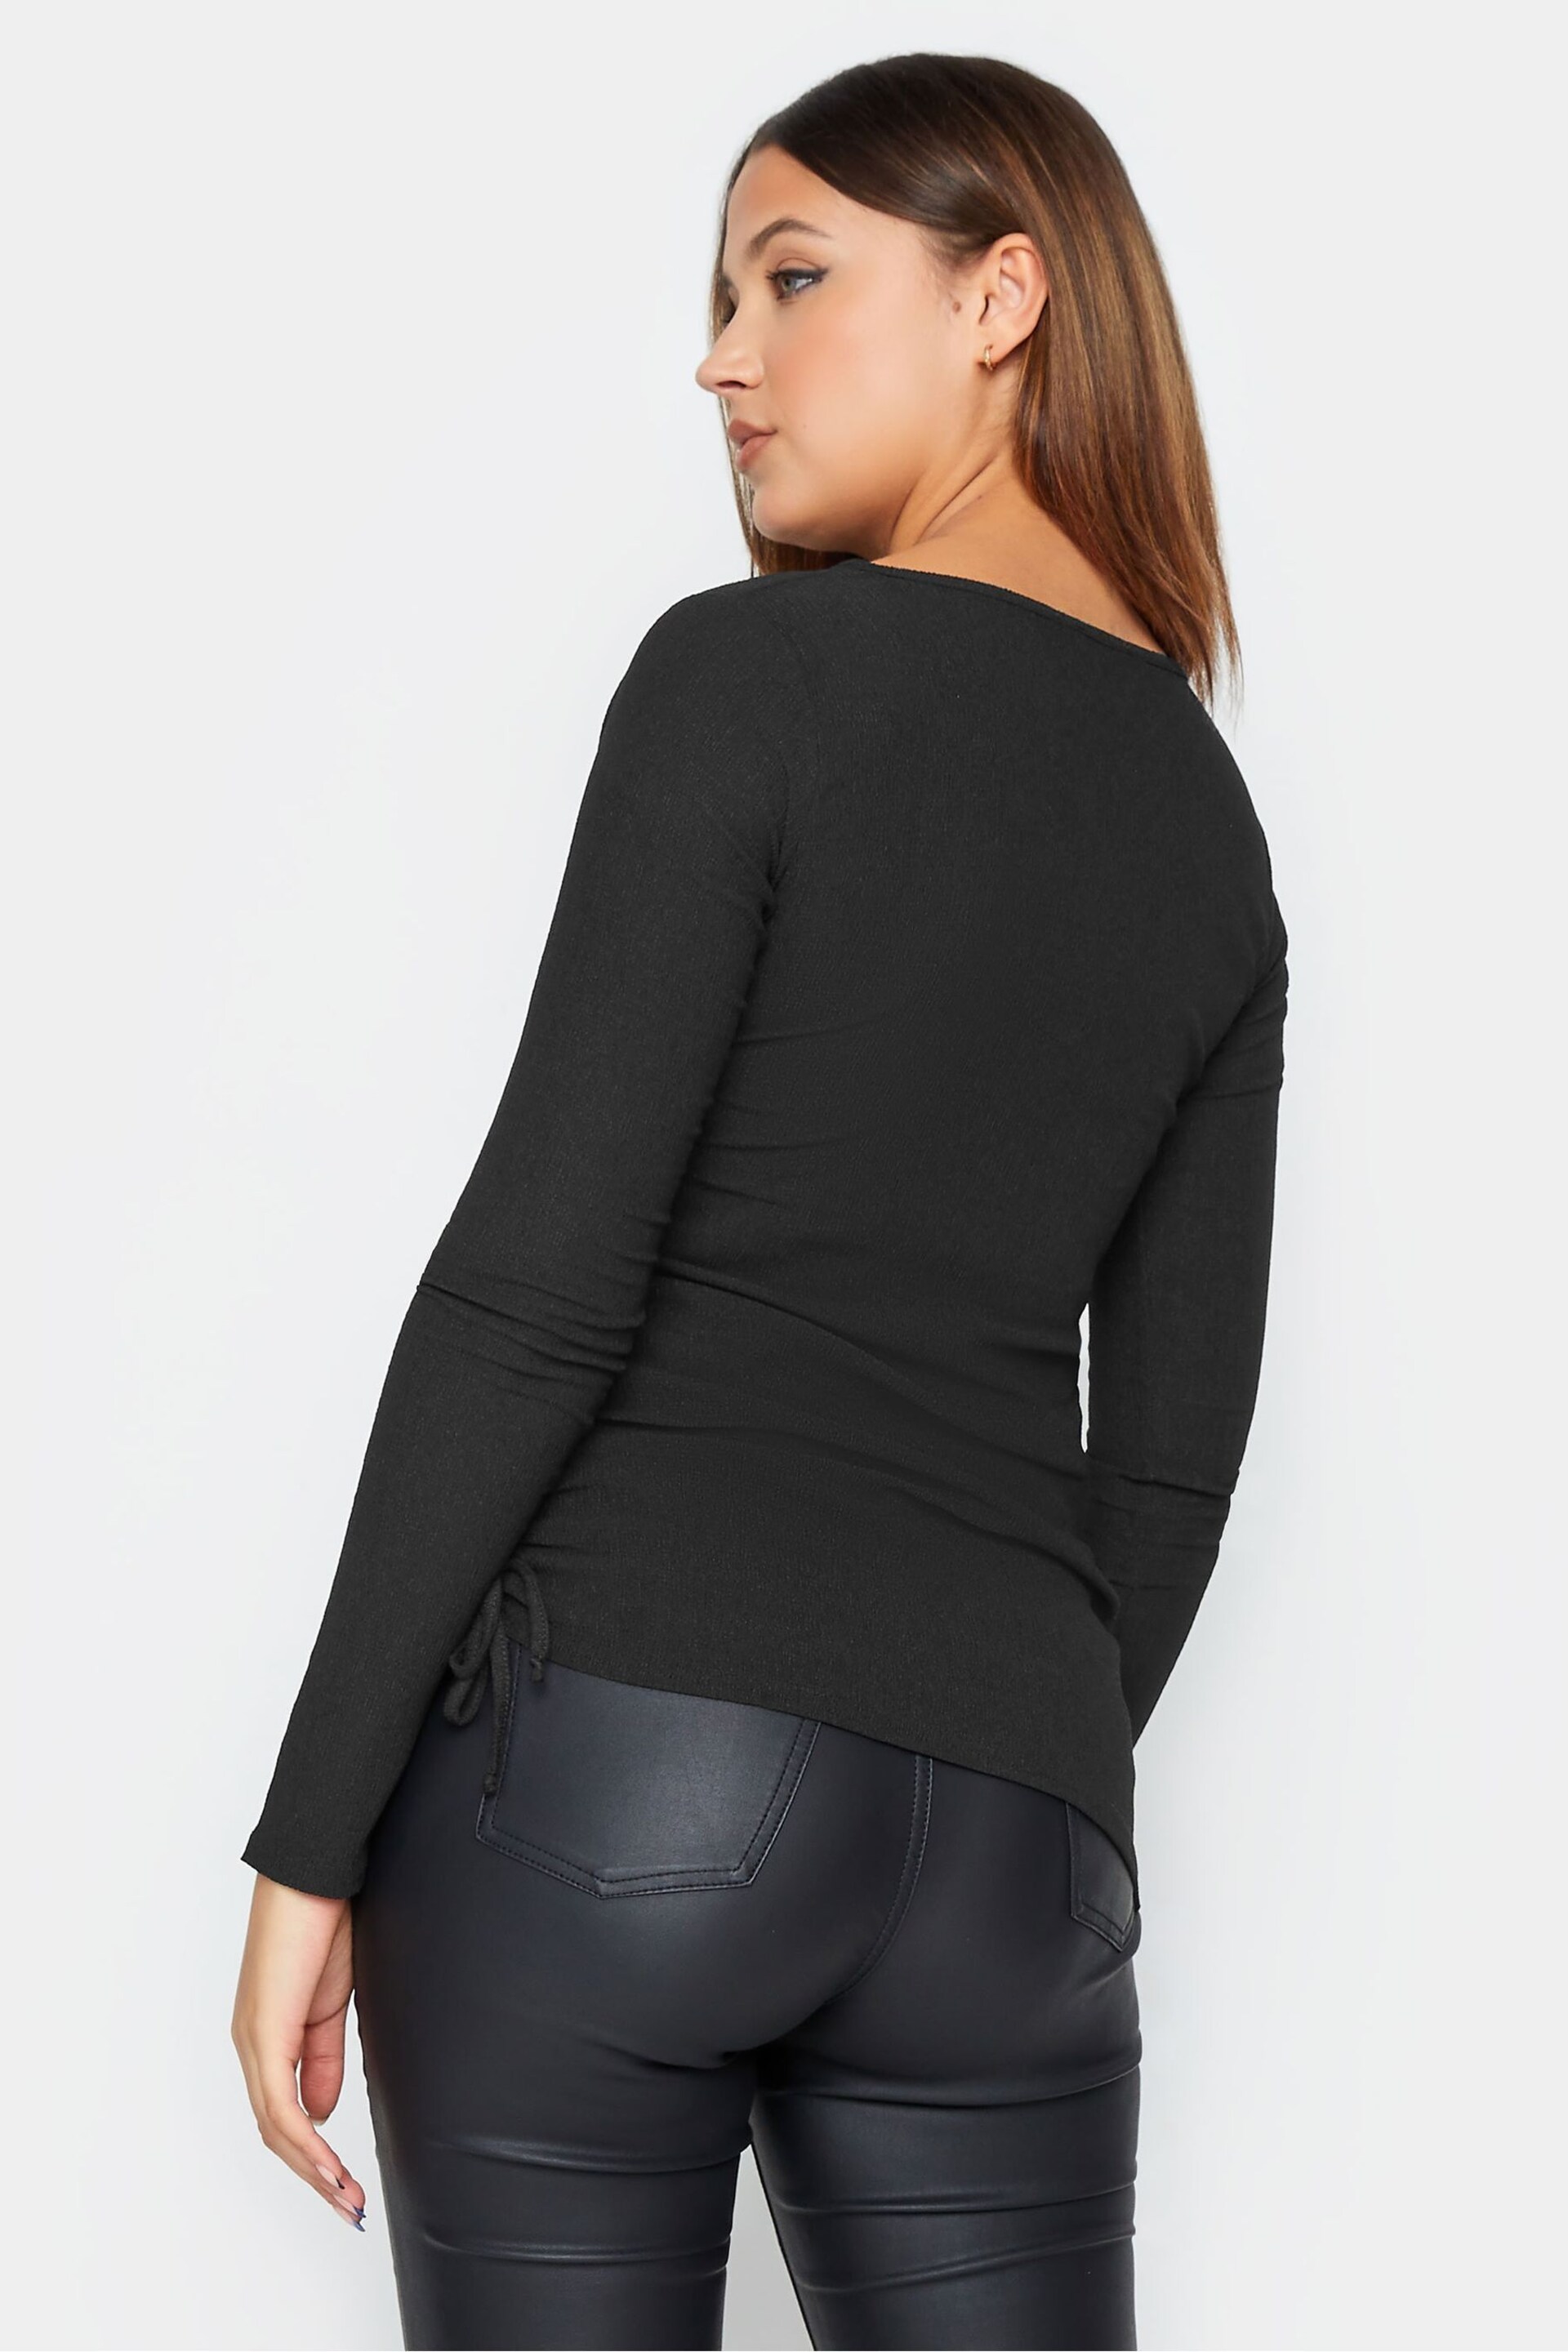 Long Tall Sally Black Textured Ruched Side Top - Image 3 of 4